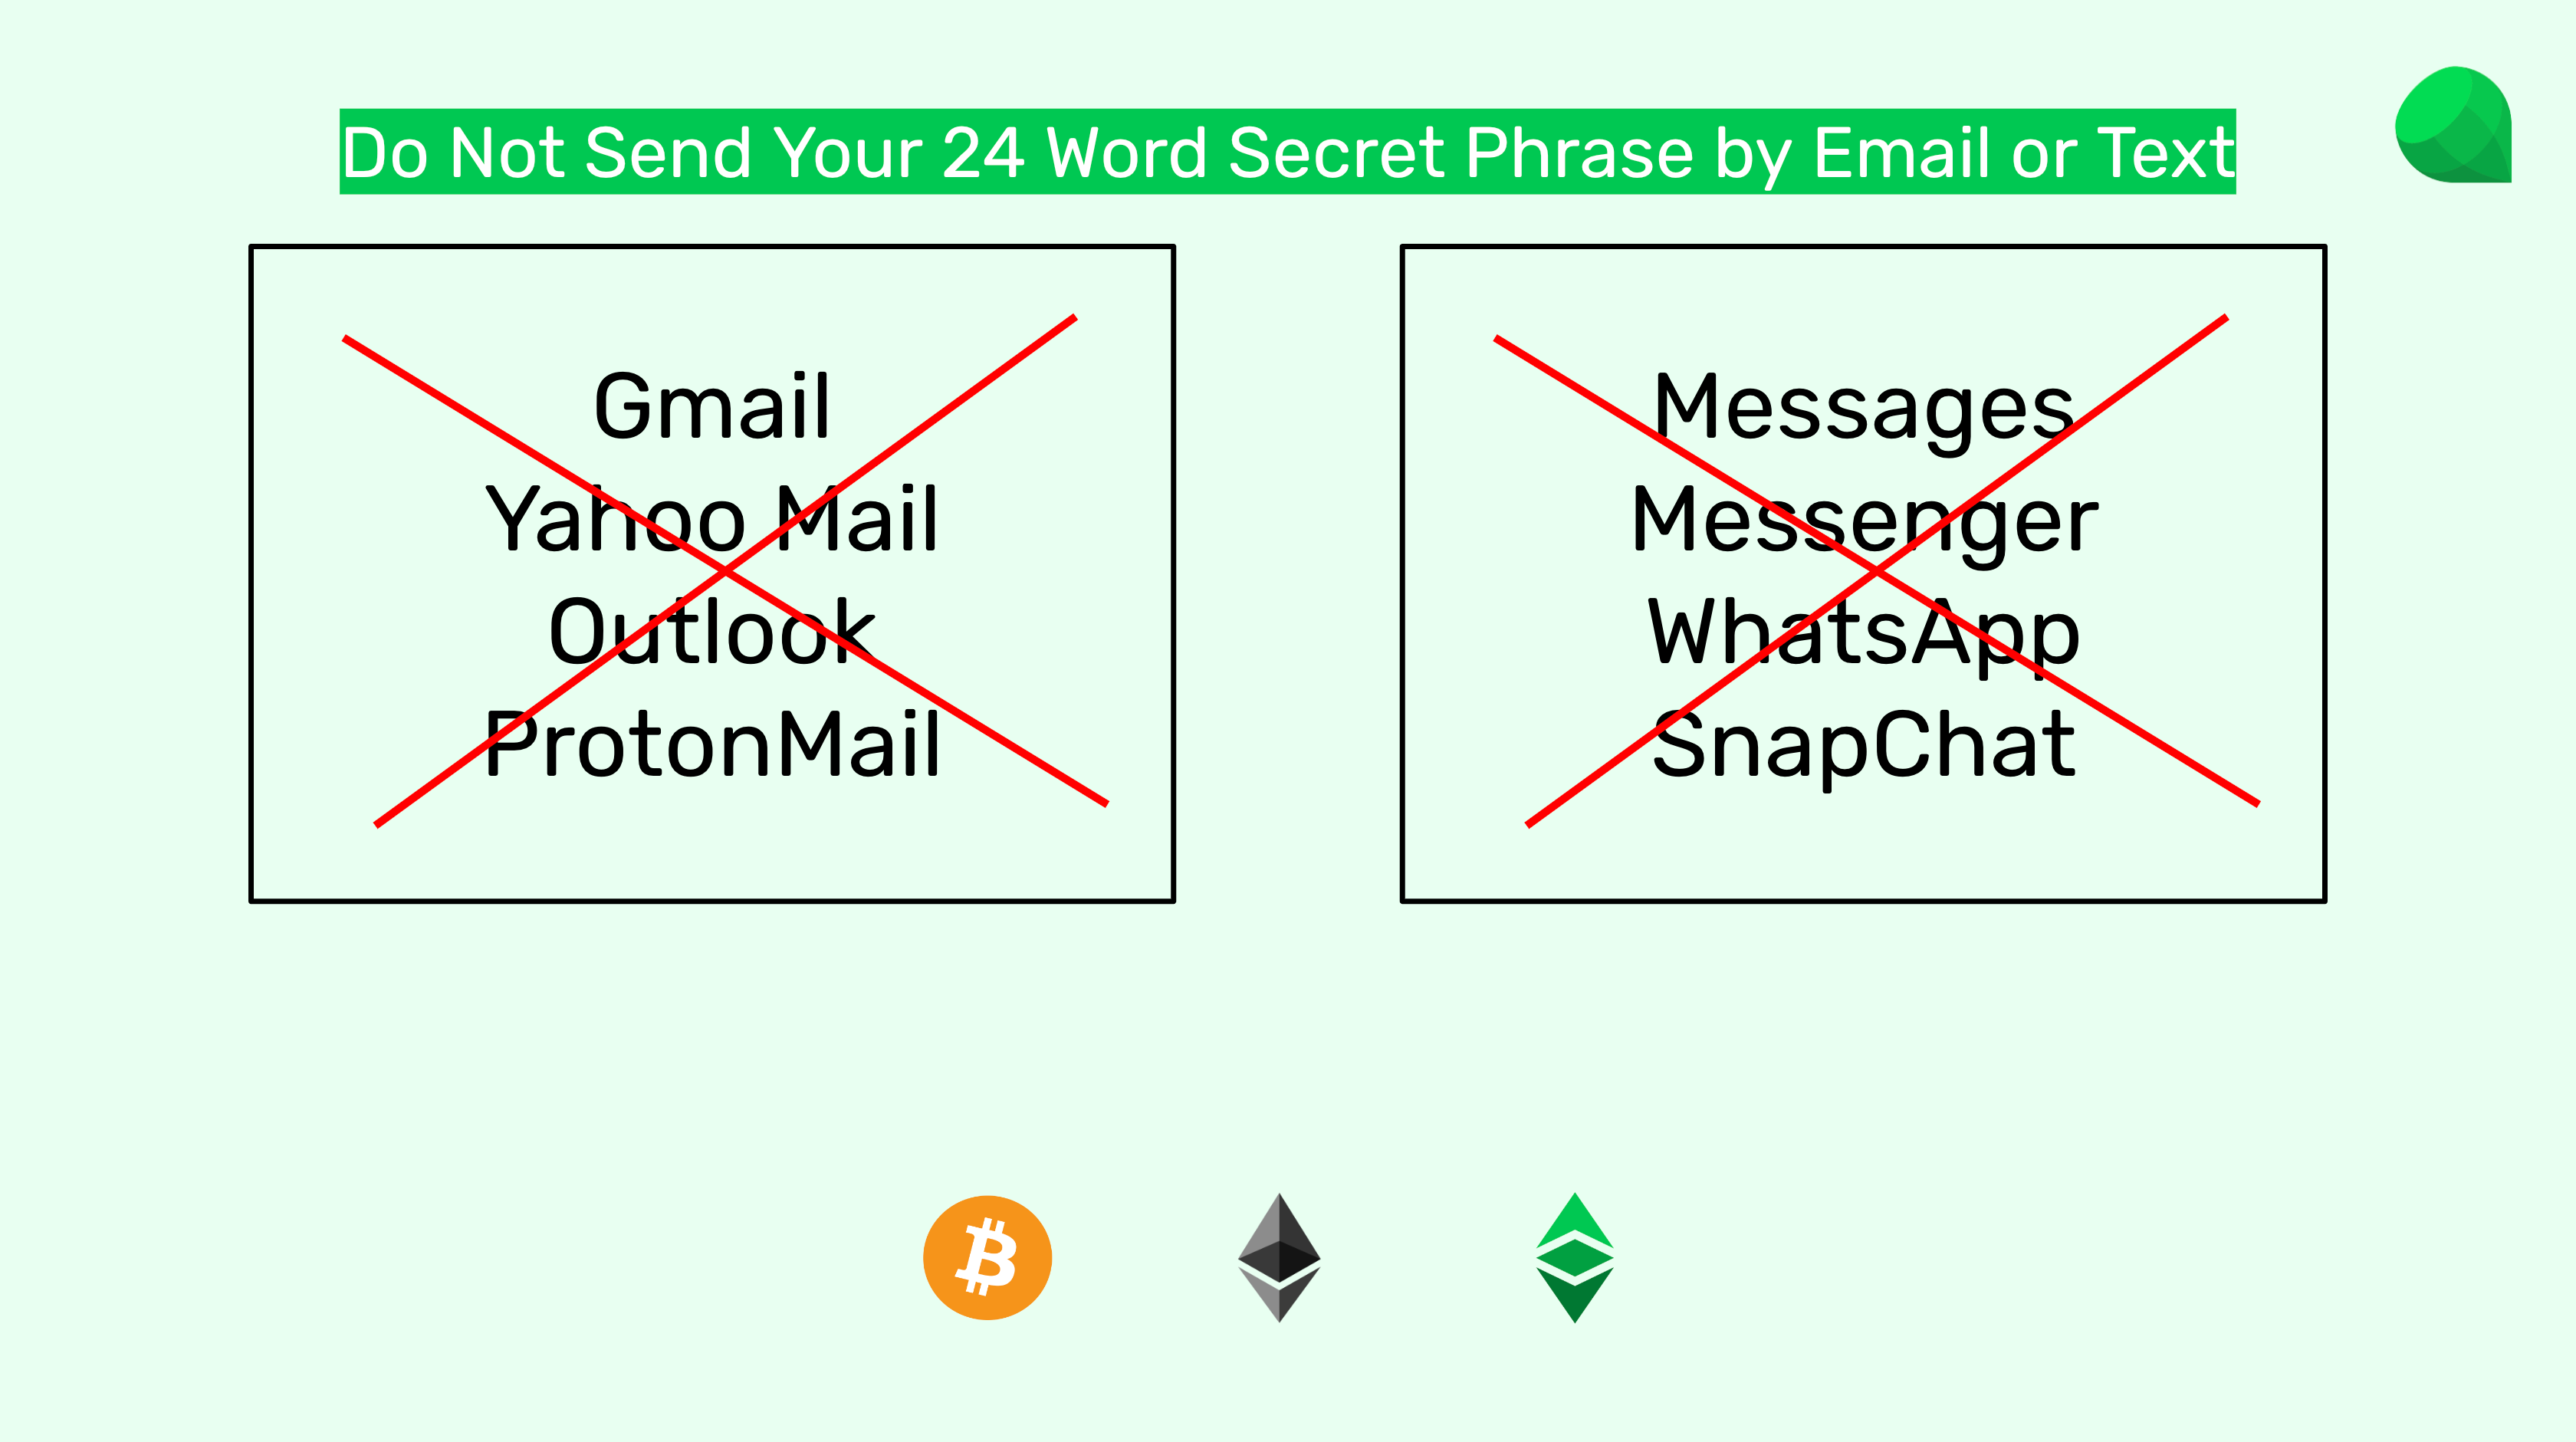 Do not send secret phrases by email nor text.